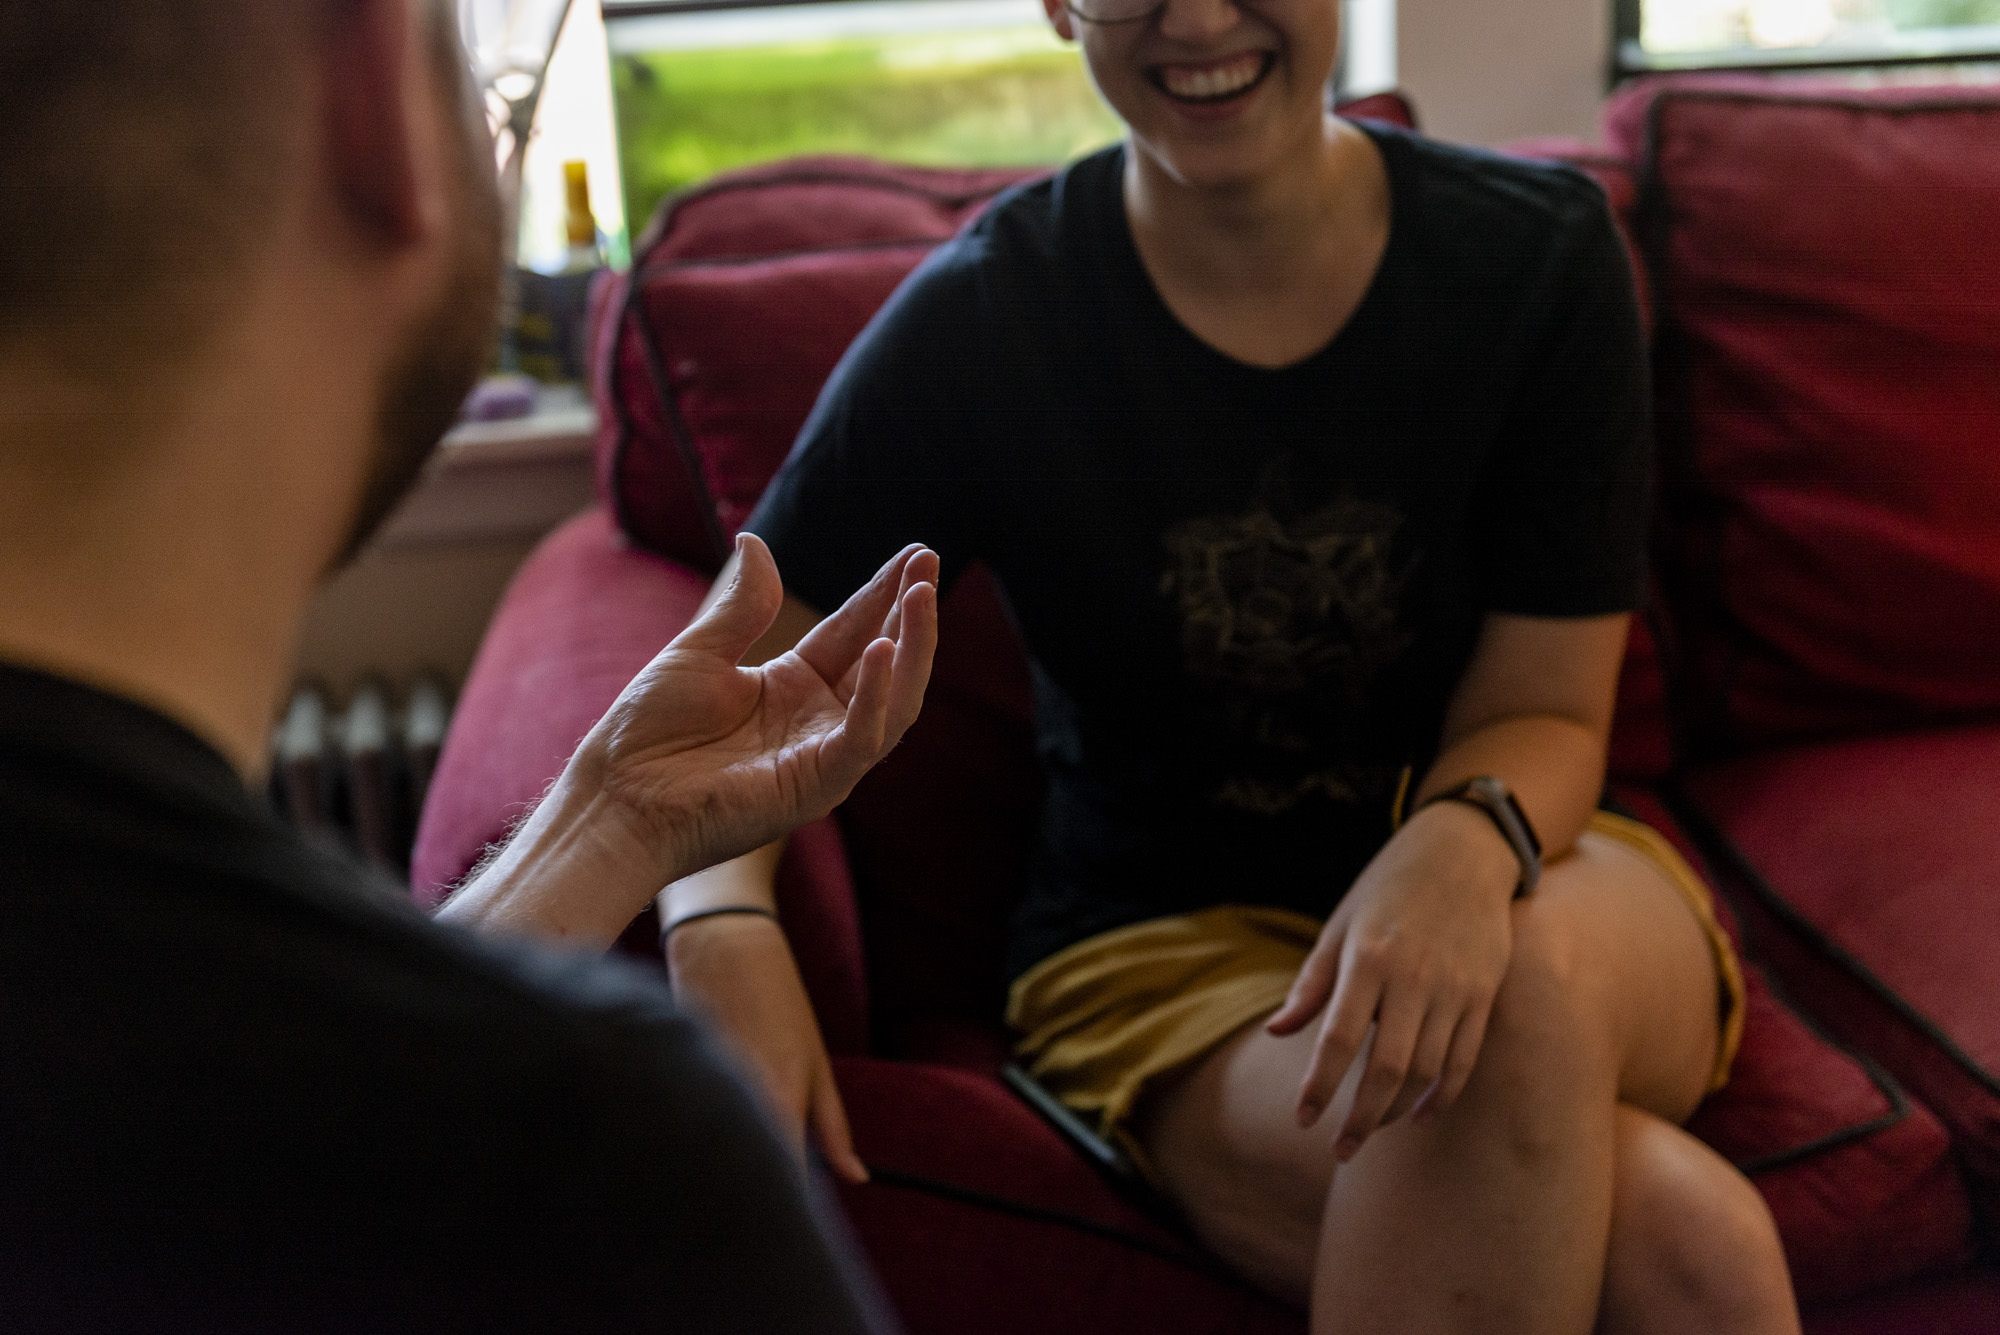 Image: The viewer is looking over the artists shoulder as he makes a hand gesture that resembles a "cupping" motion. Across from the artist is his roommate, their legs are crossed with one arm resting on their left leg. The top half of their face is out of the frame but their bottom half is laughing. Photo by Ryan Edmund Thiel.